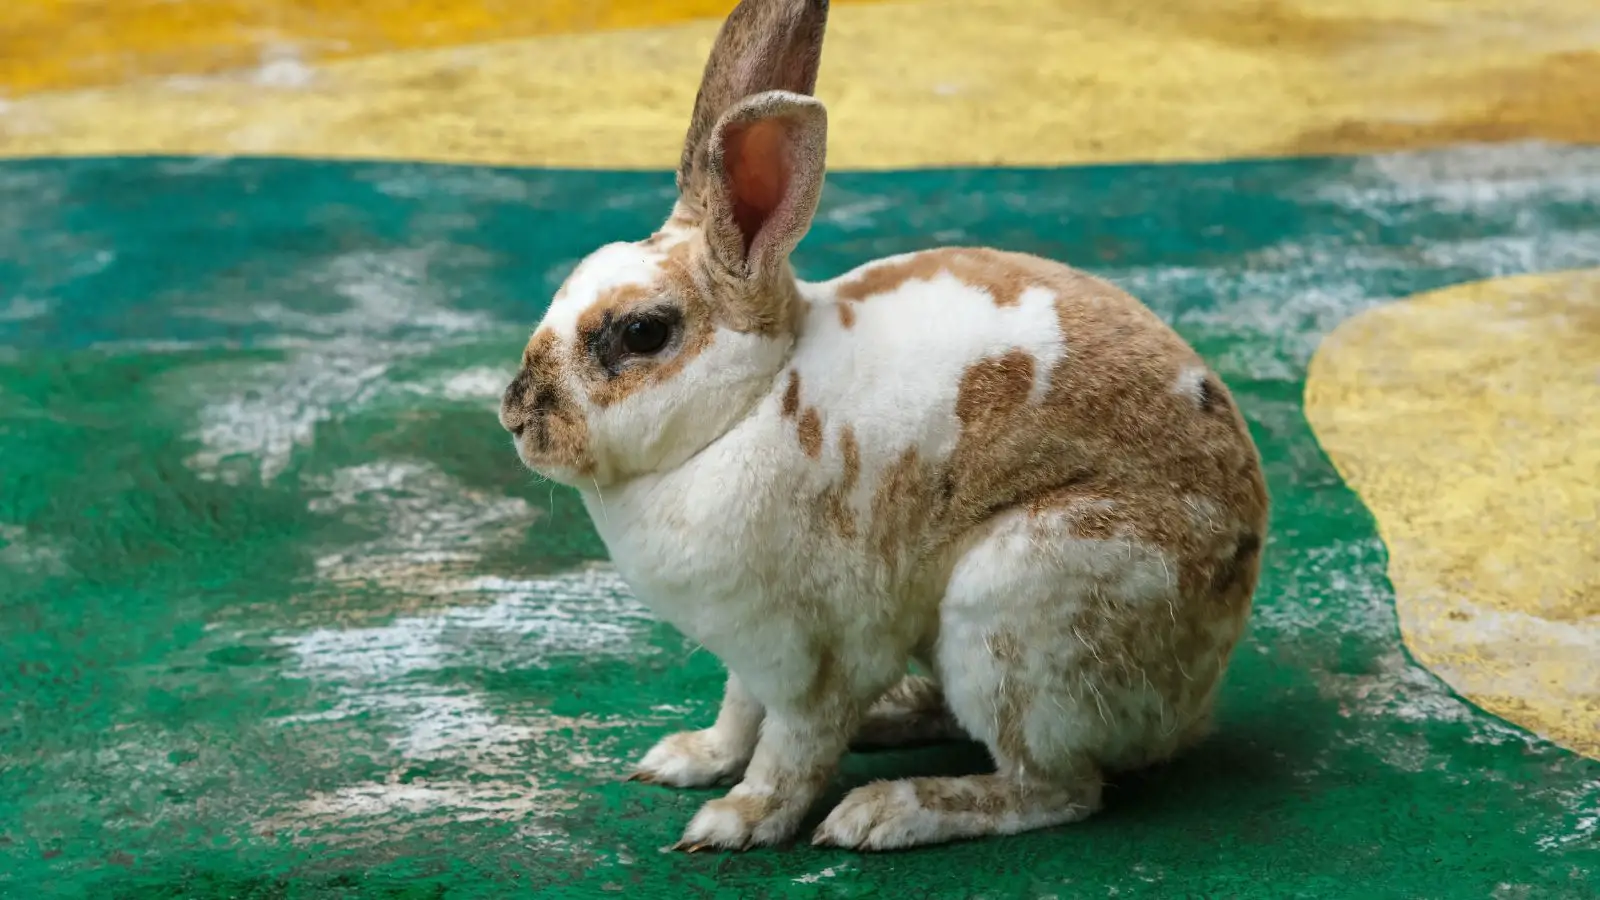 Bunny pooping - abouteverythingpets.com